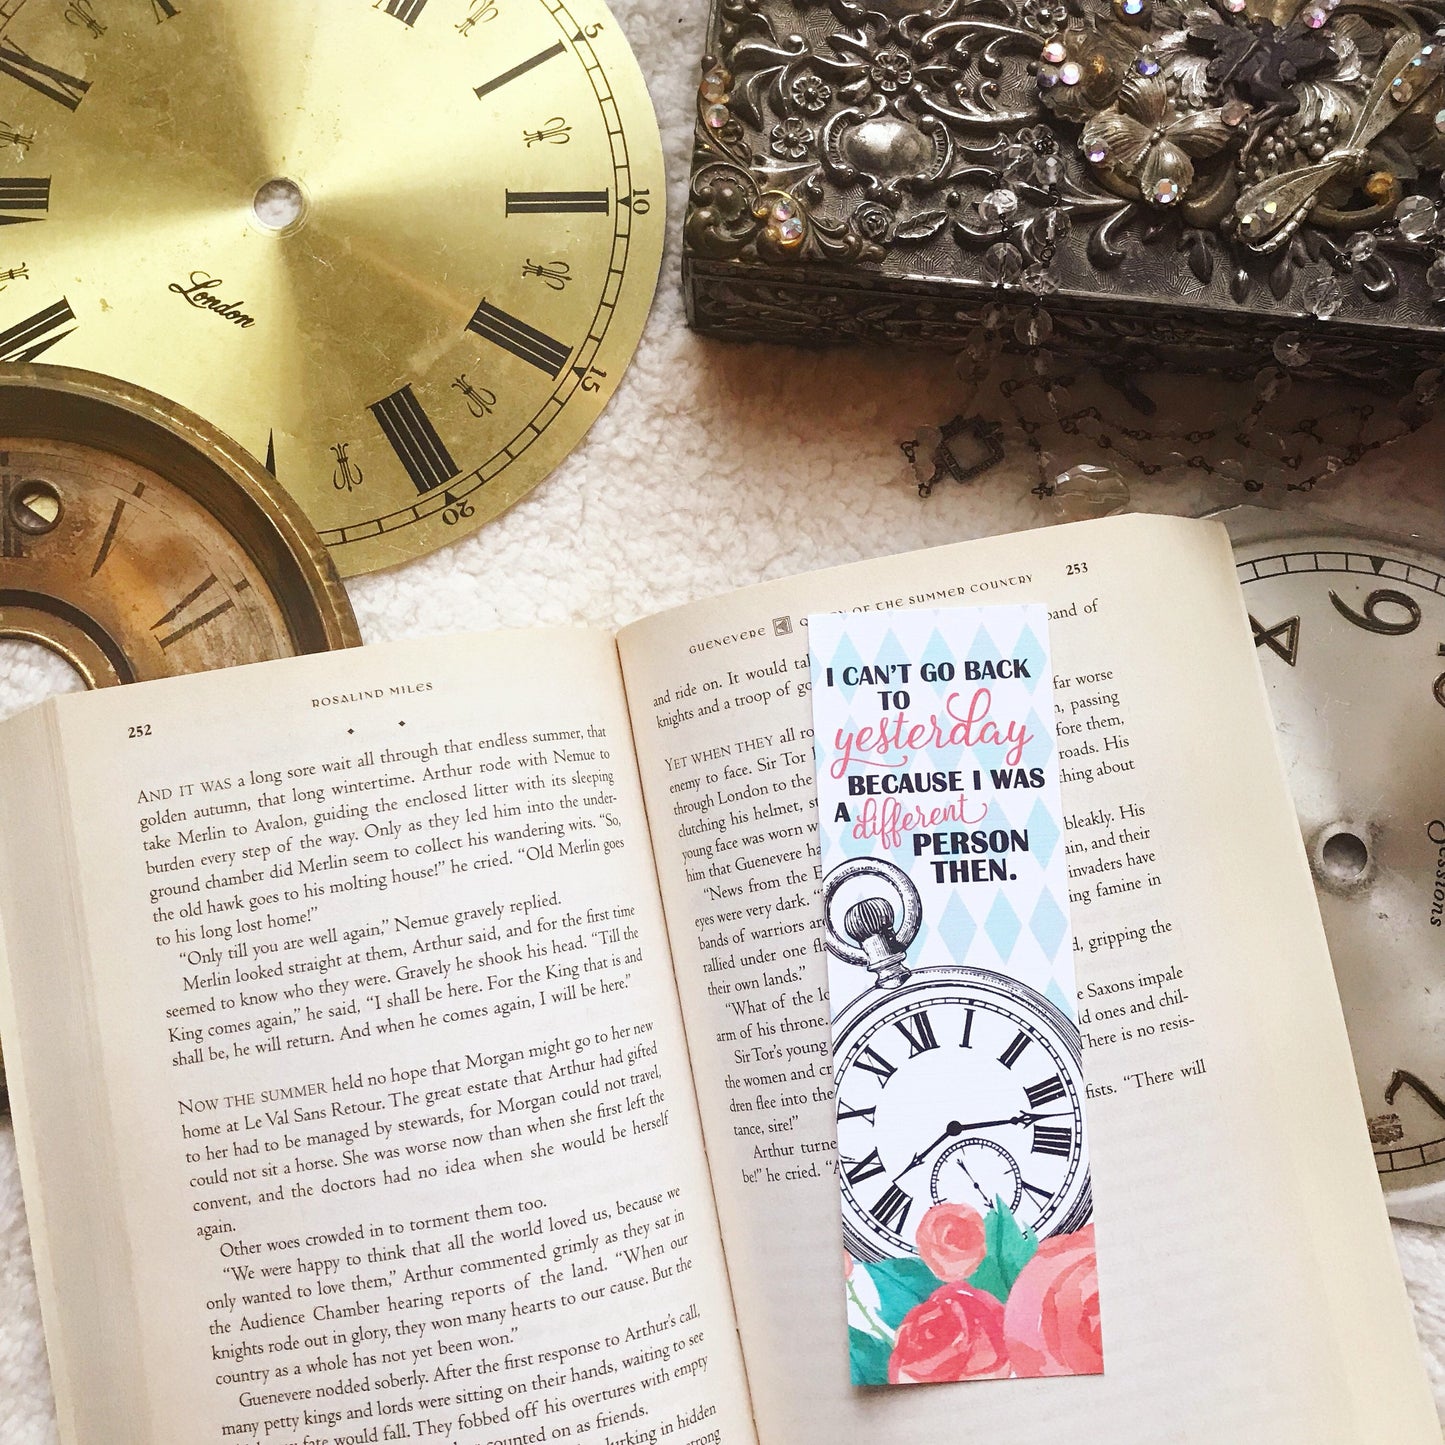 Alice in Wonderland Bookmark, "I Can't Go Back to Yesterday Because I Was a Different Person Then"